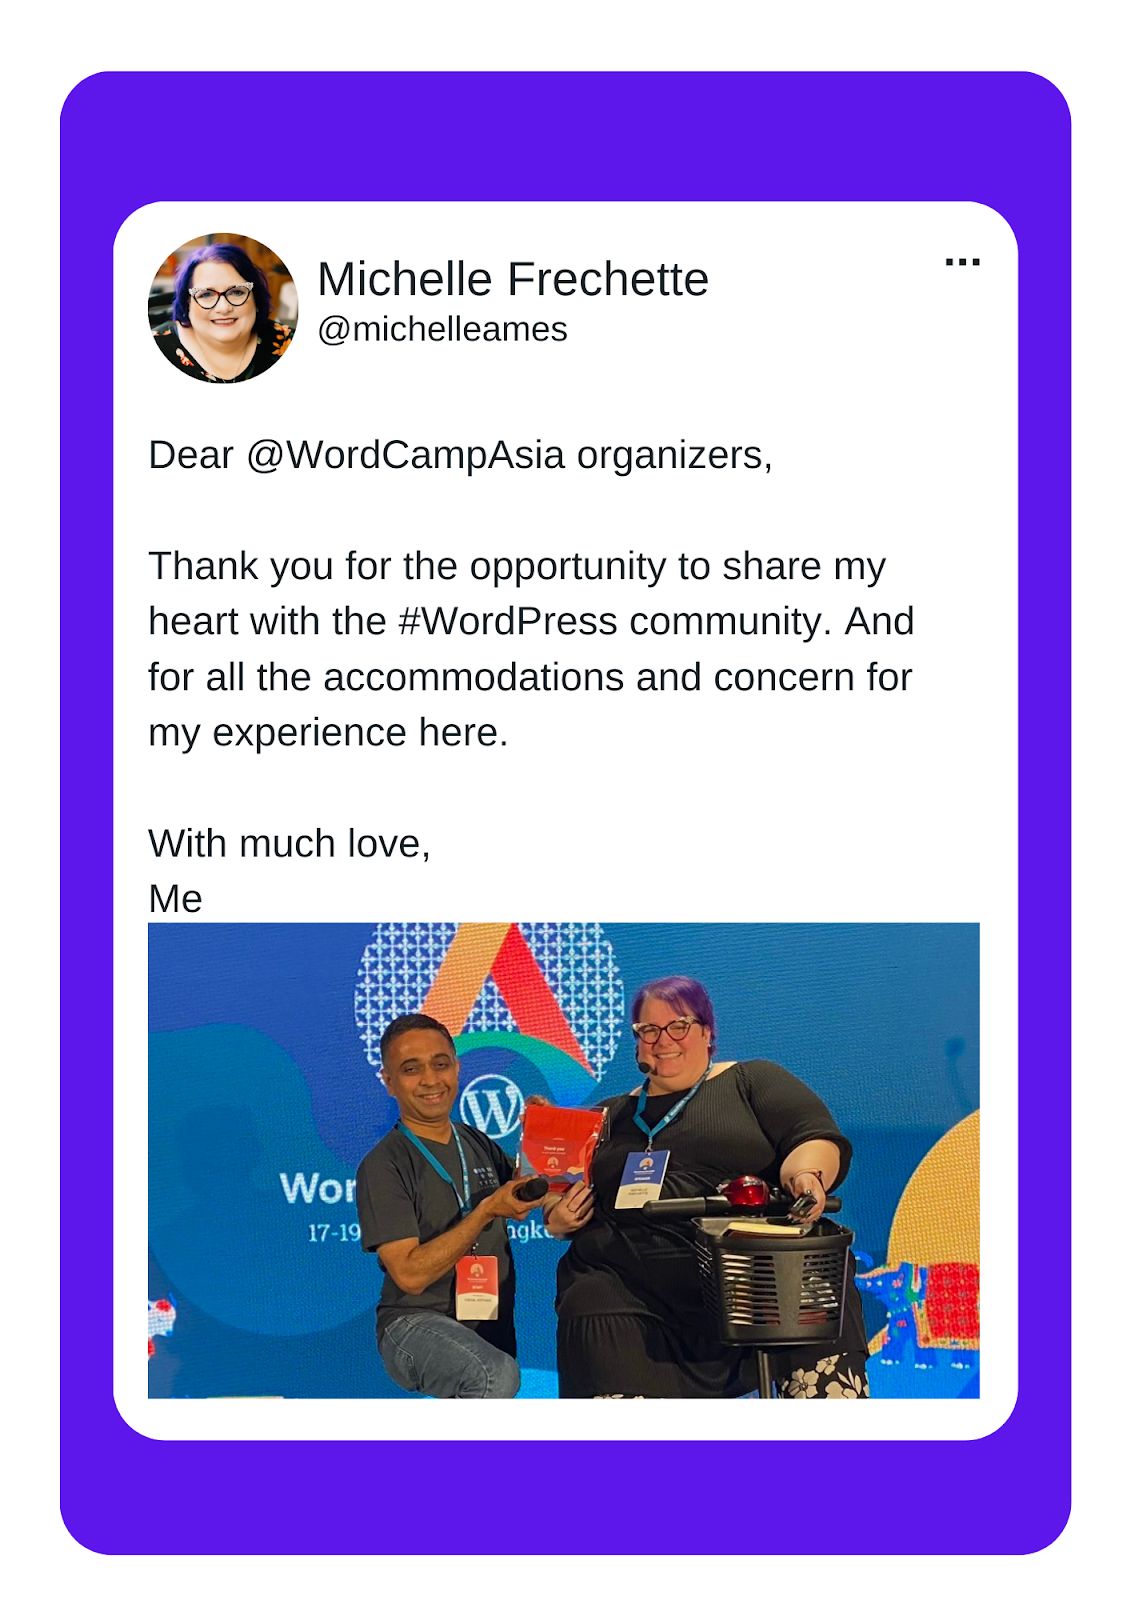 A tweet from Michelle Frechette layered over a purple background that reads "Dear @WordCampAsia organizers. Thank you for the opportunity to share my heart with the #WordPress community. And for all the accommodations and concern for my experience here. With much love, Me." Beneath that is a photo of Michelle Frechette posing with a Word Camp Asia attendee.